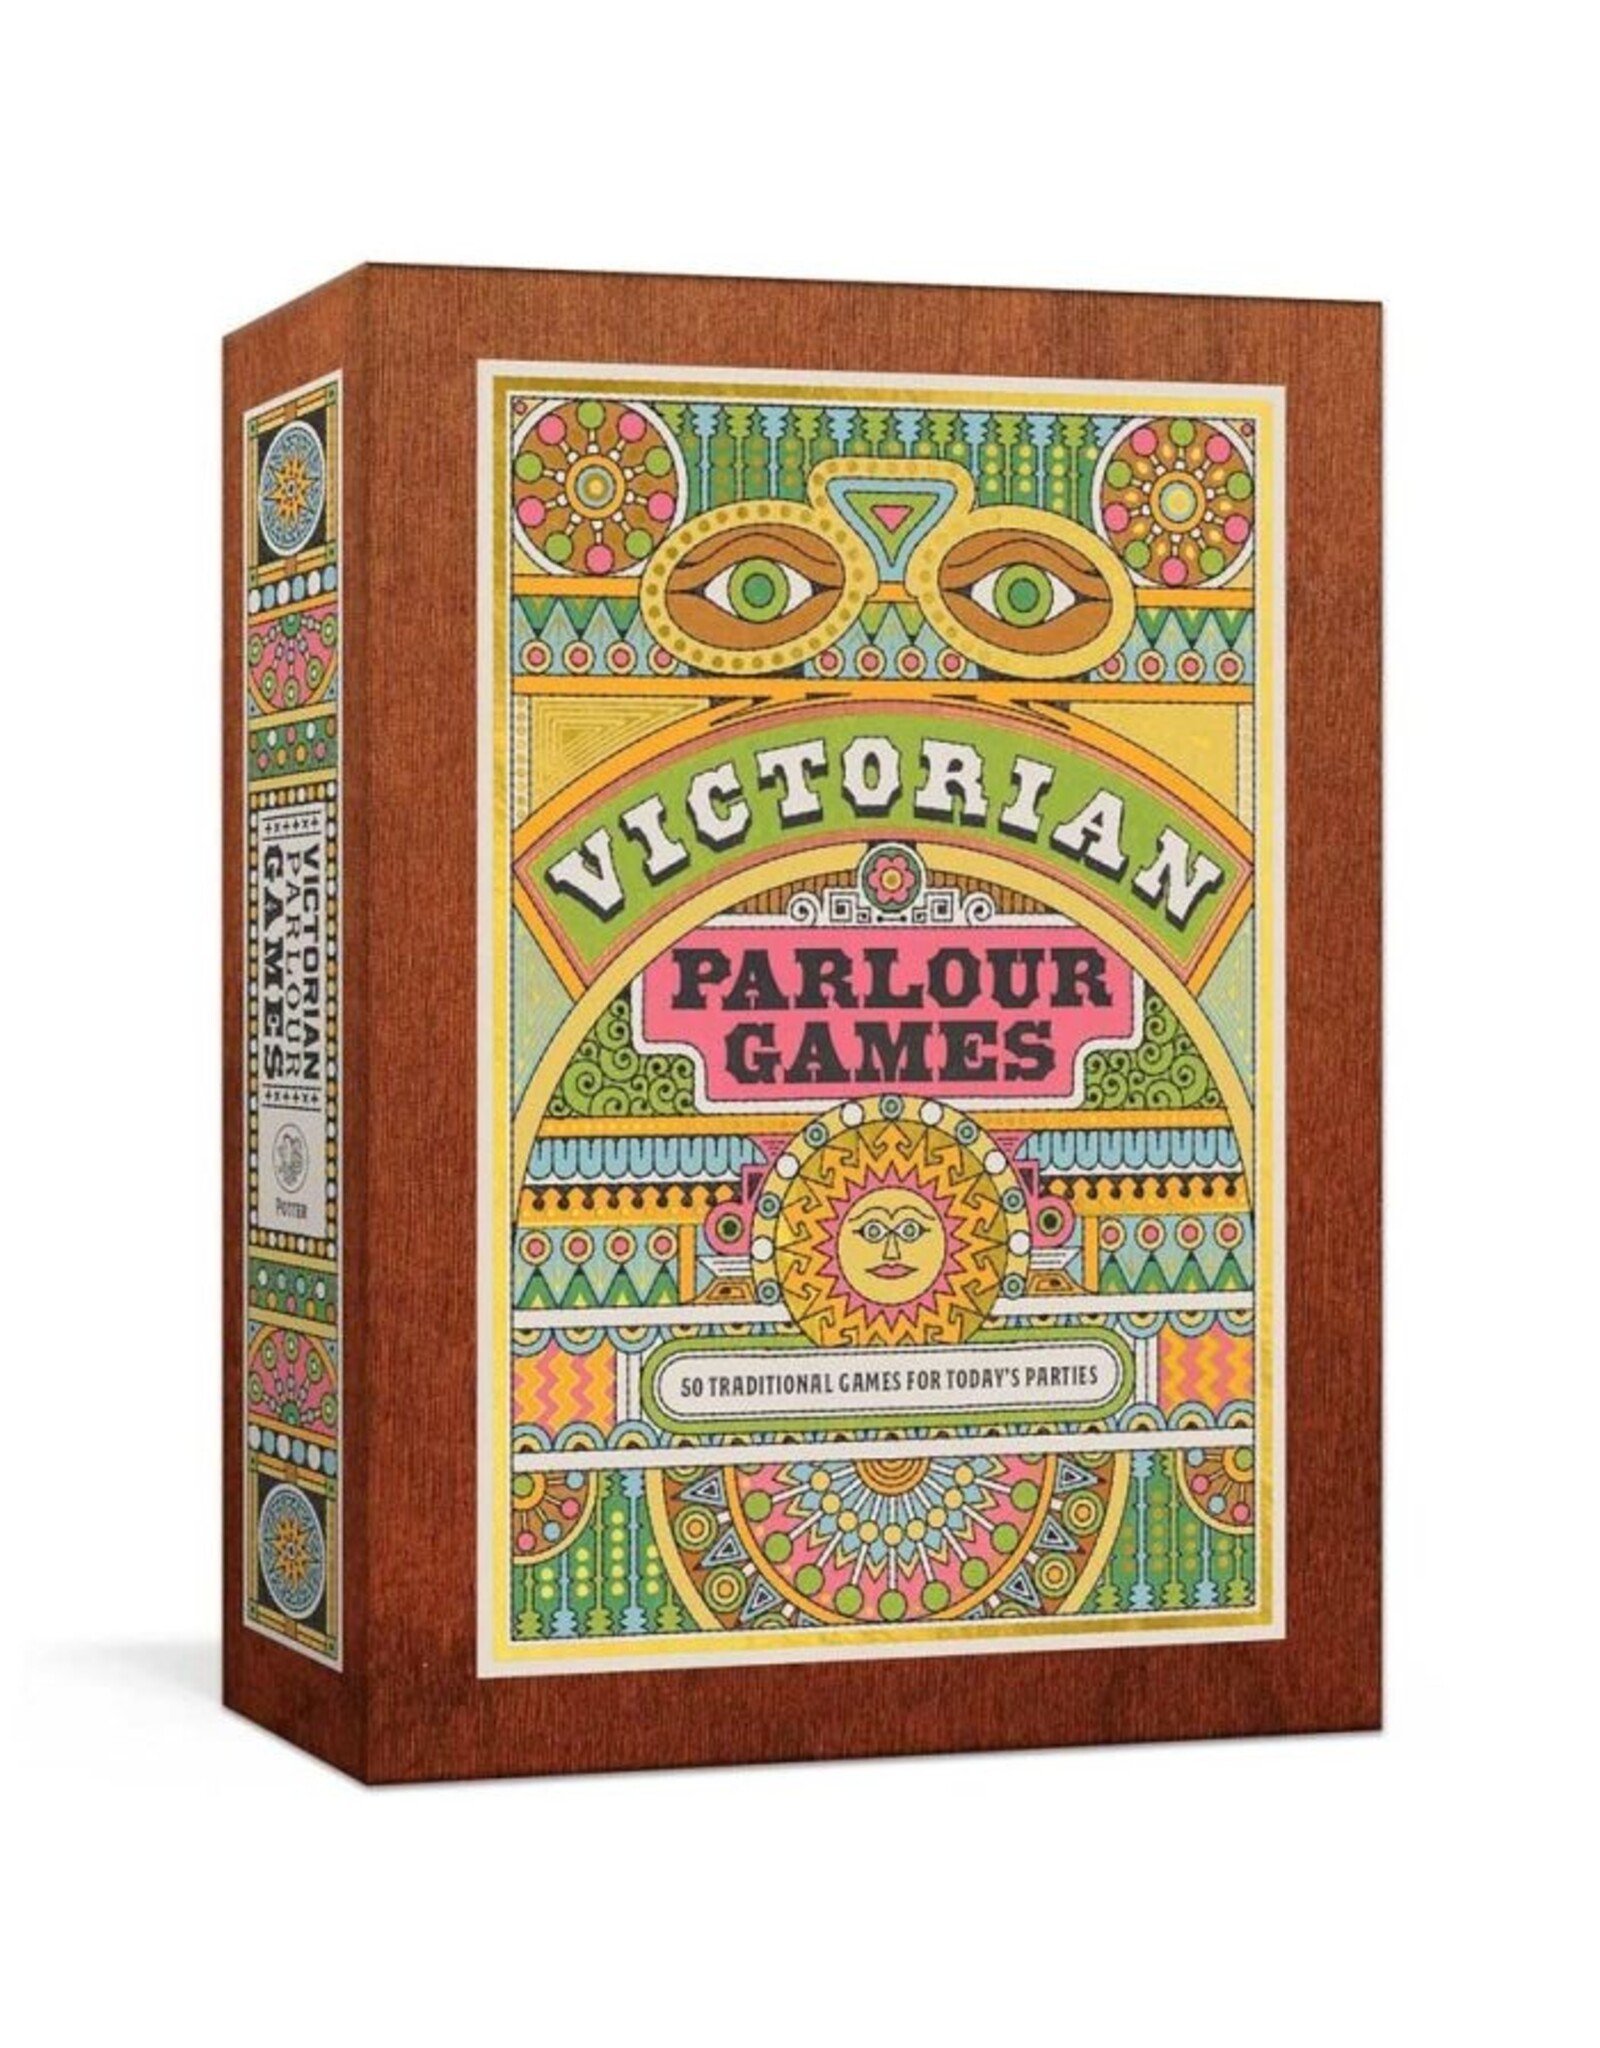 Random House Victorian Parlour Games: 50 Traditional Games for Today's Parties